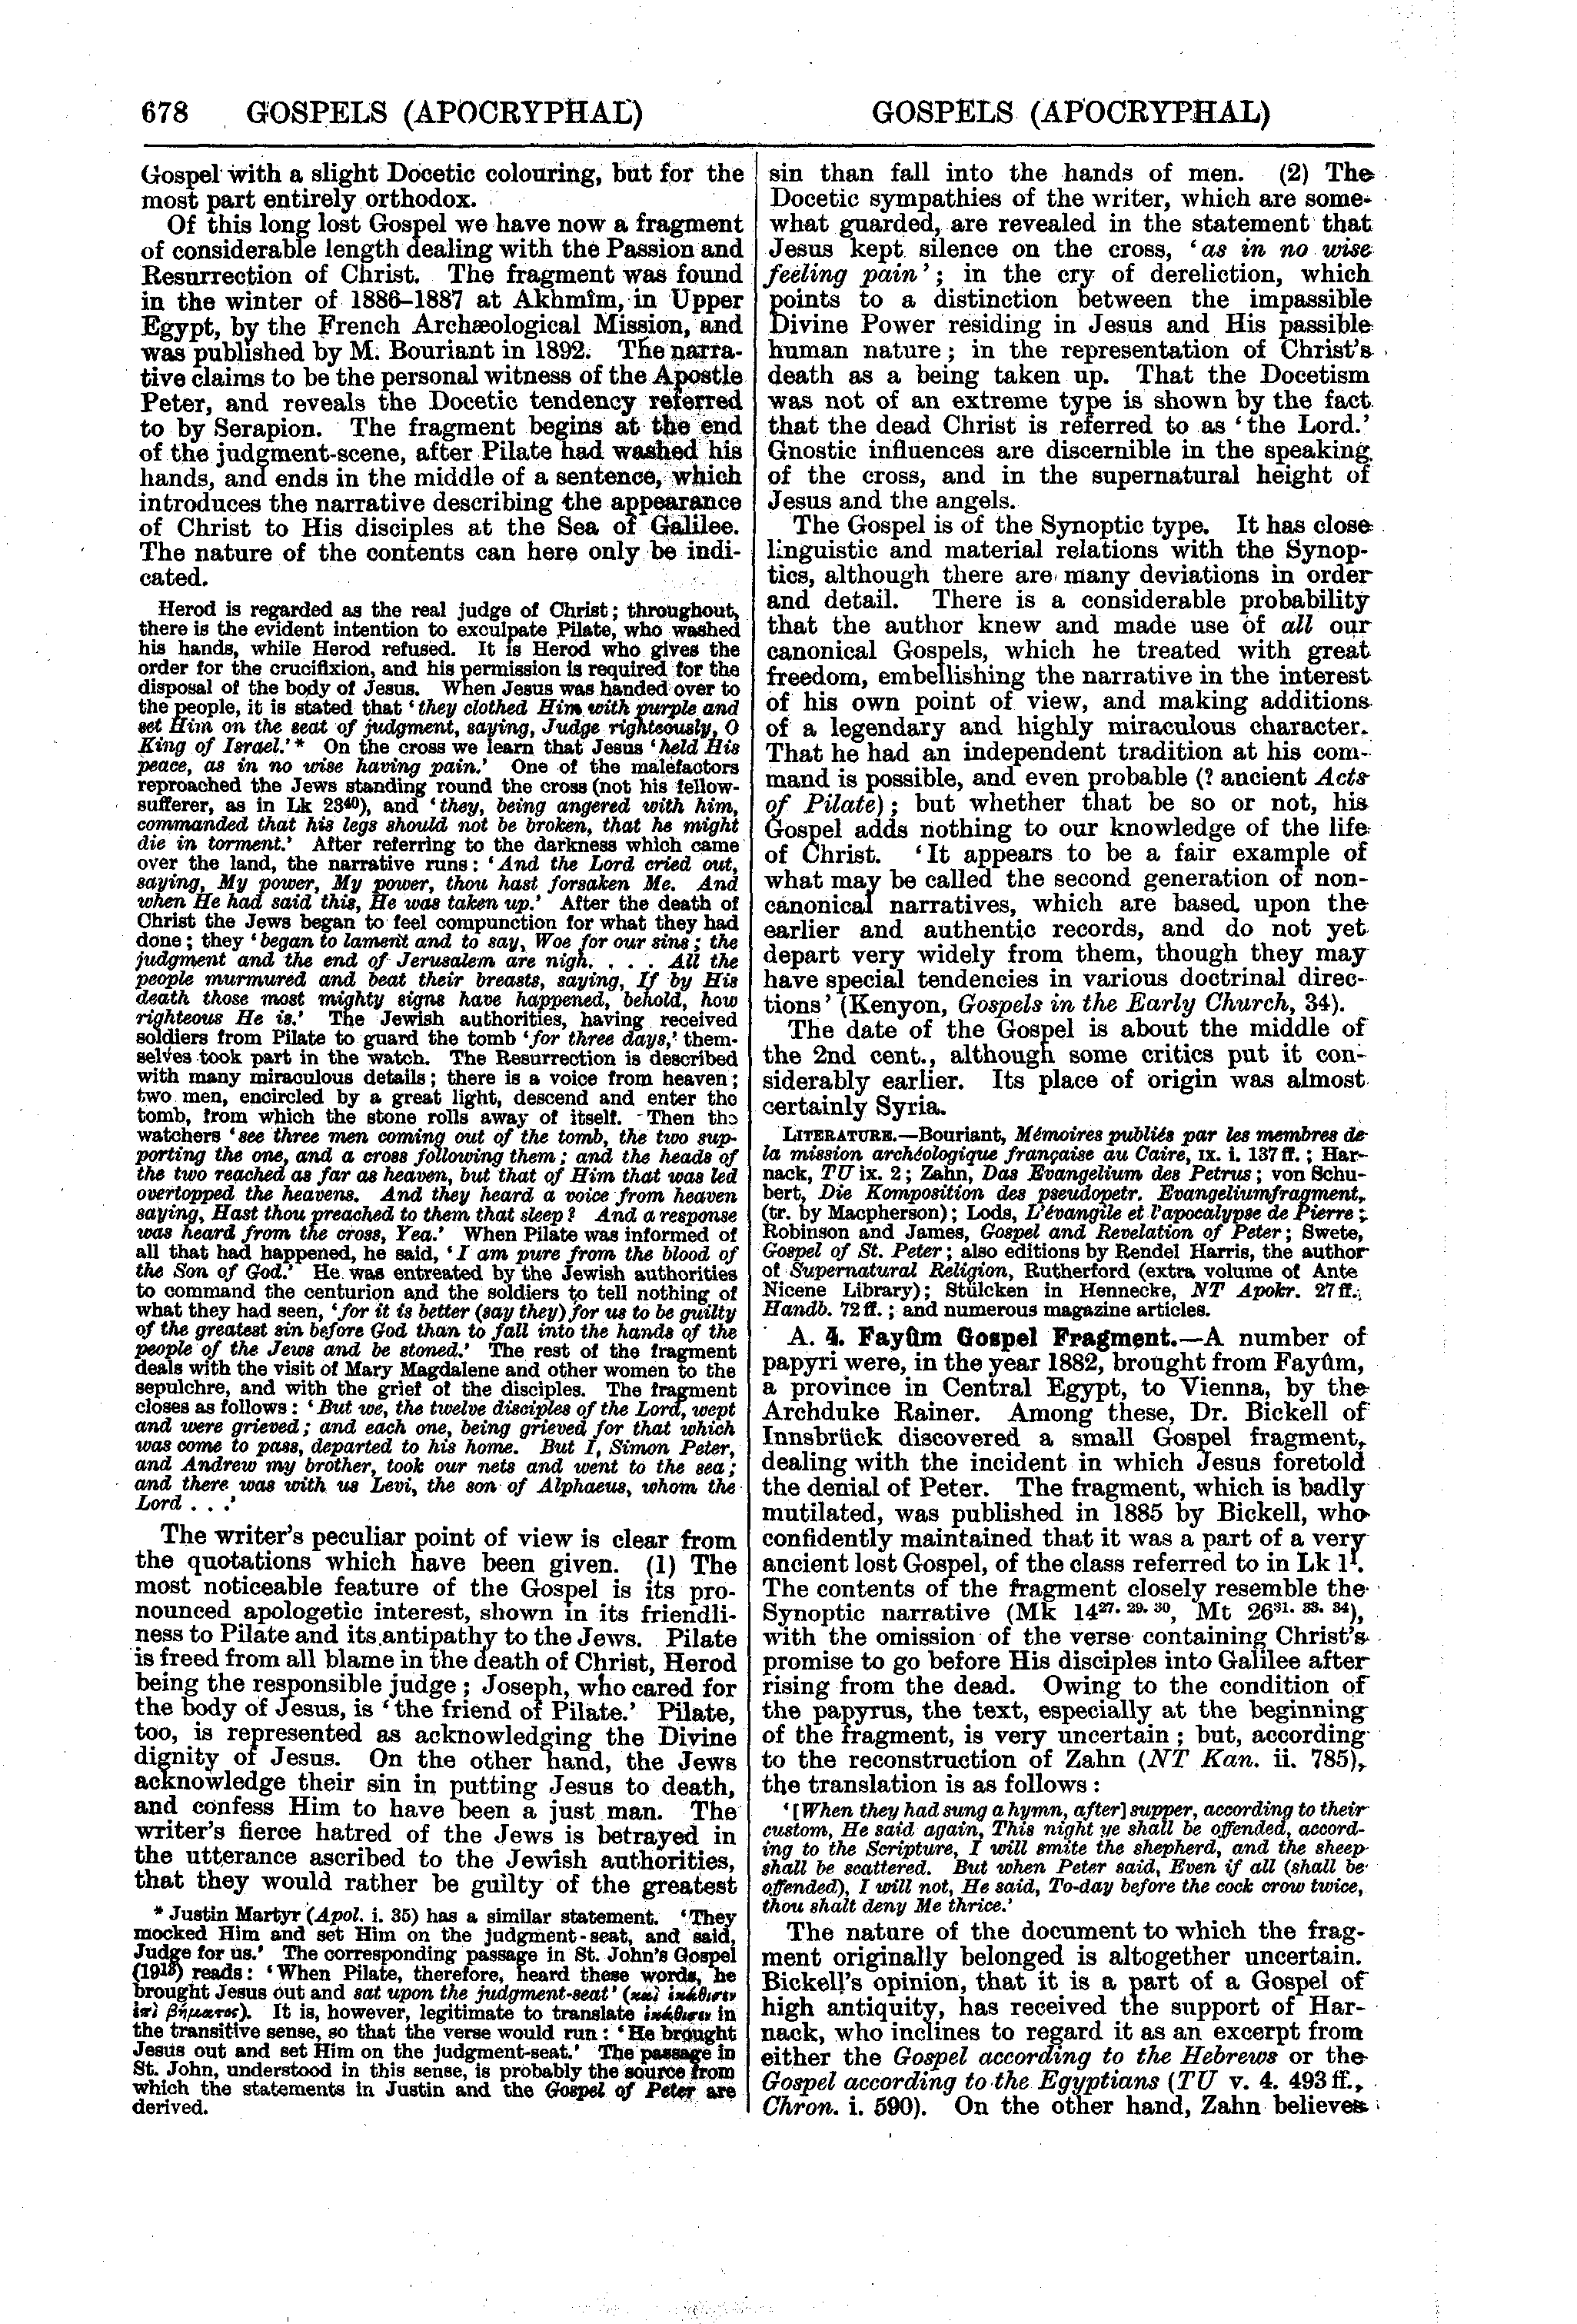 Image of page 678